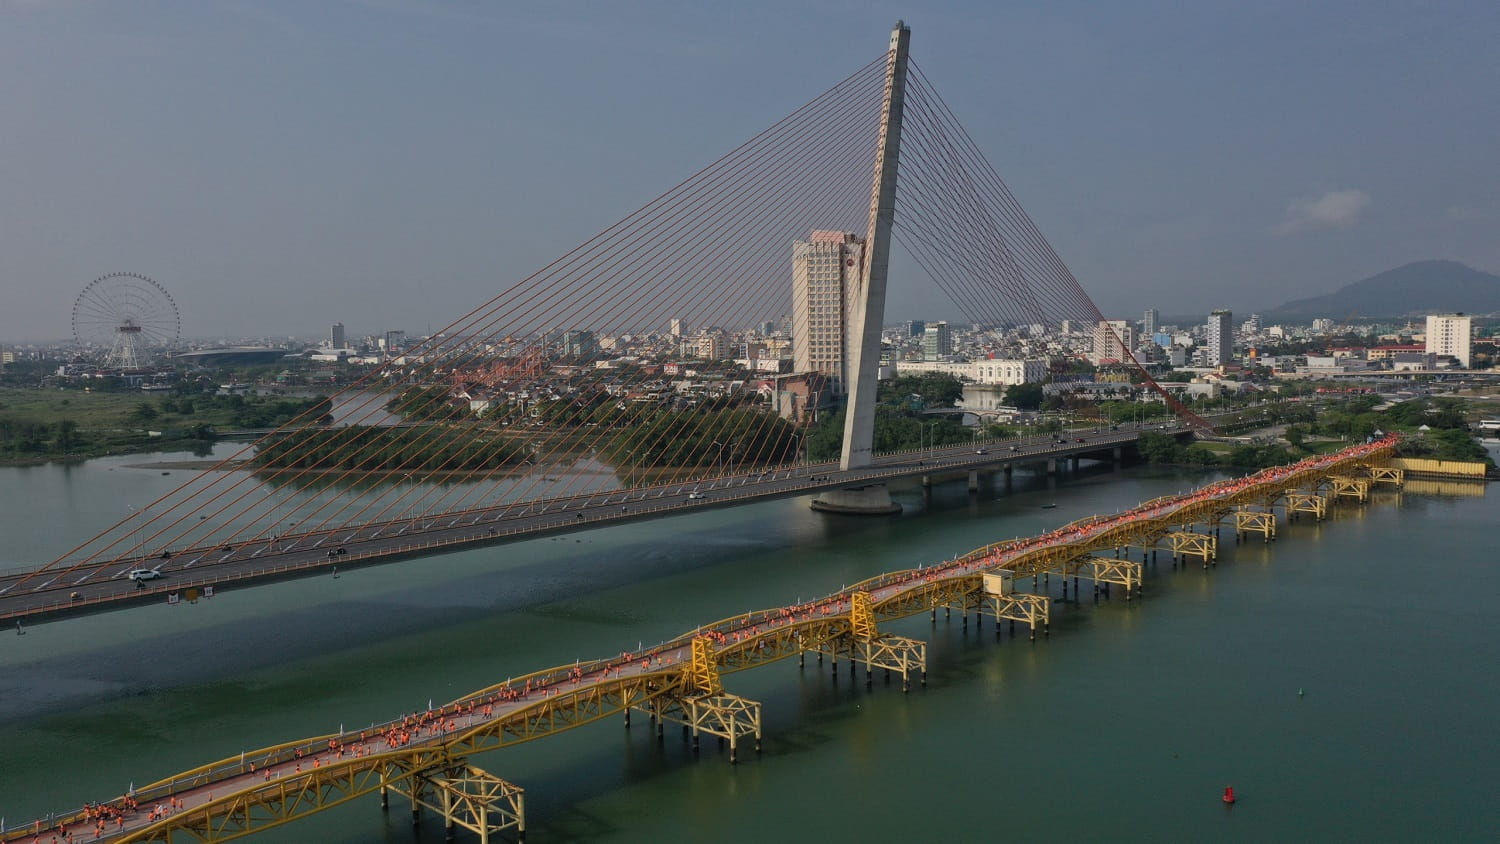 The participants experienced a beautiful running track across the Nguyen Van Troi pedestrian bridge - the oldest bridge connecting two banks of the Han River